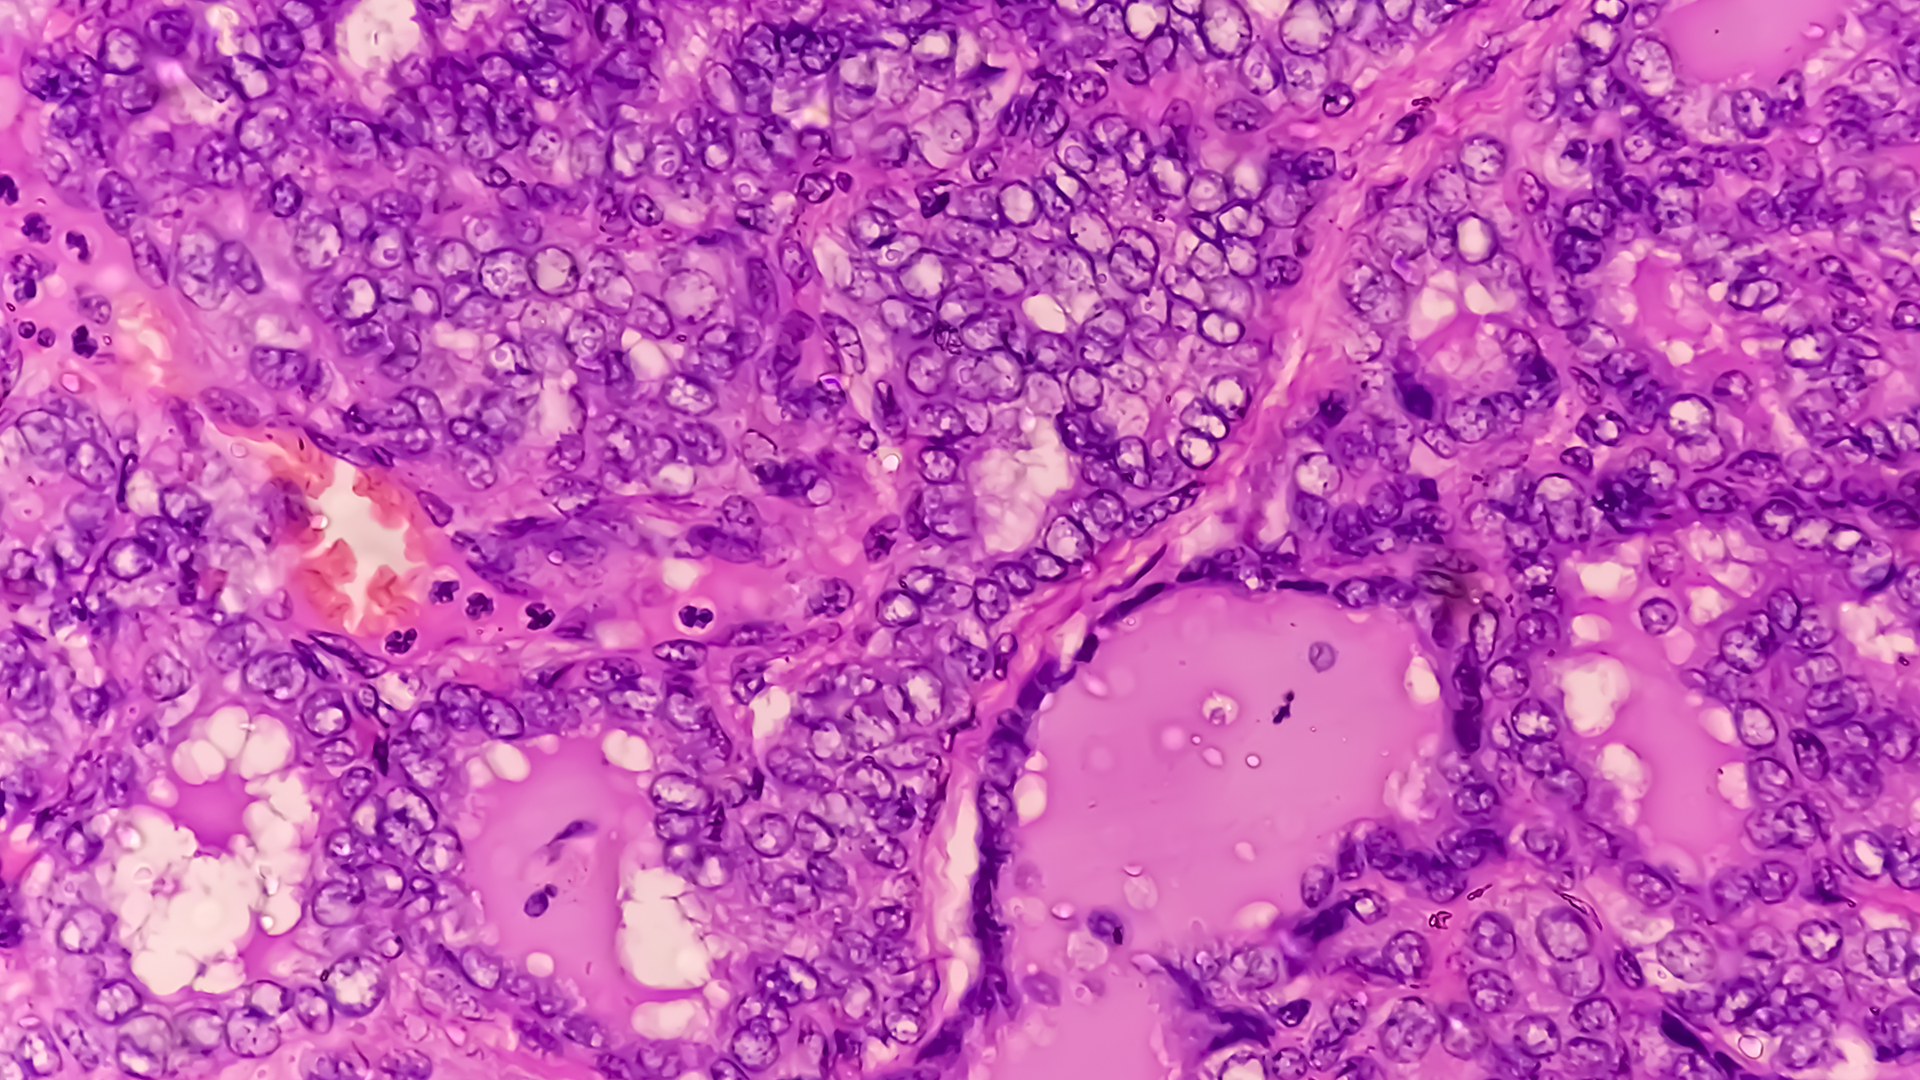 metastatic non-small cell lung cancer